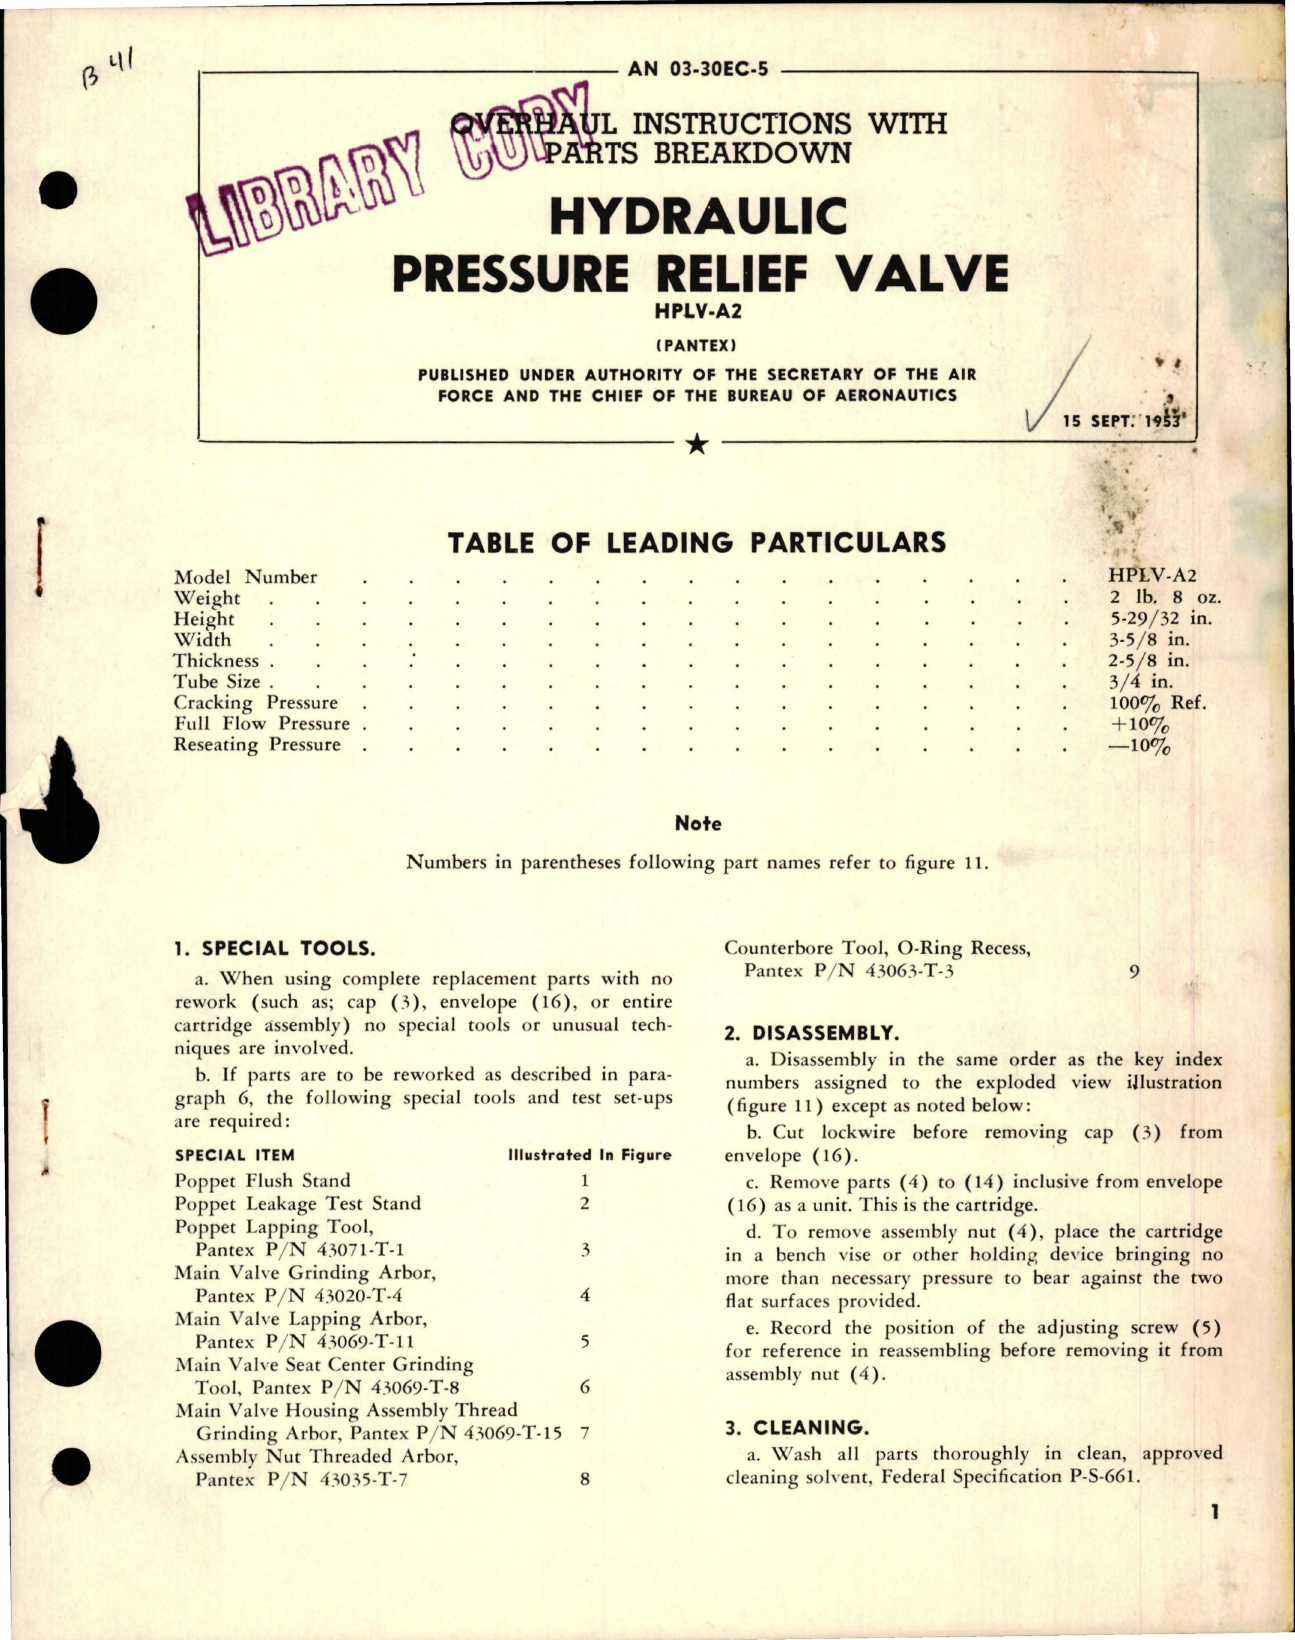 Sample page 1 from AirCorps Library document: Overhaul Instructions with Parts Breakdown for Hydraulic Pressure Relief Valve - HPLV-A2 